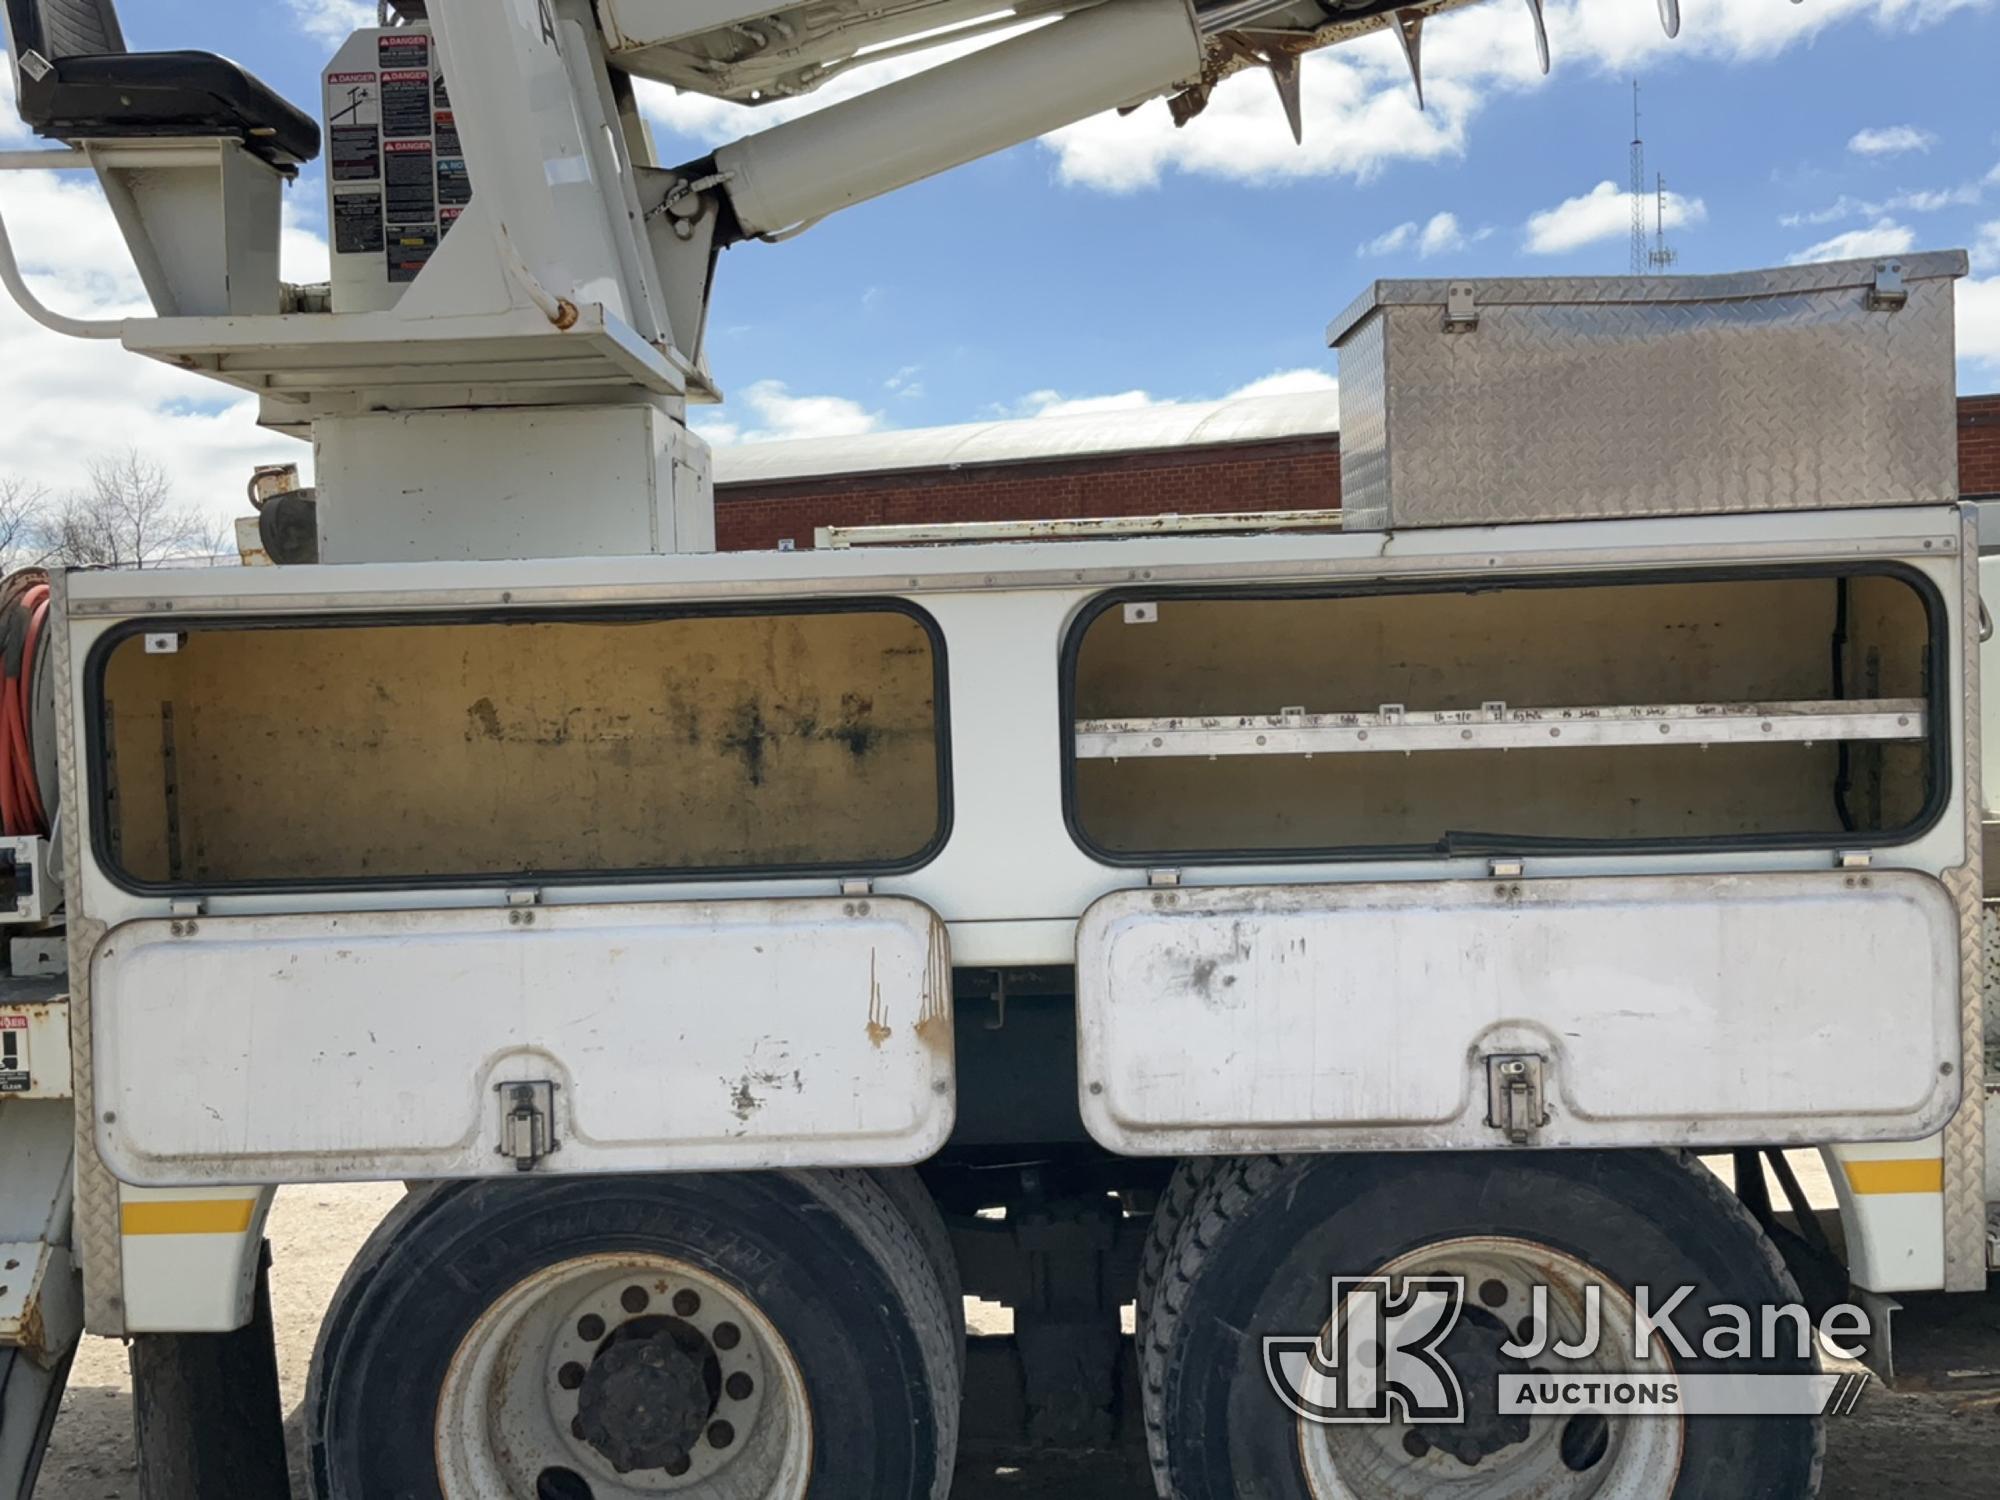 (Des Moines, IA) Altec D945-BB, Digger Derrick rear mounted on 2001 International 4900 T/A Utility T